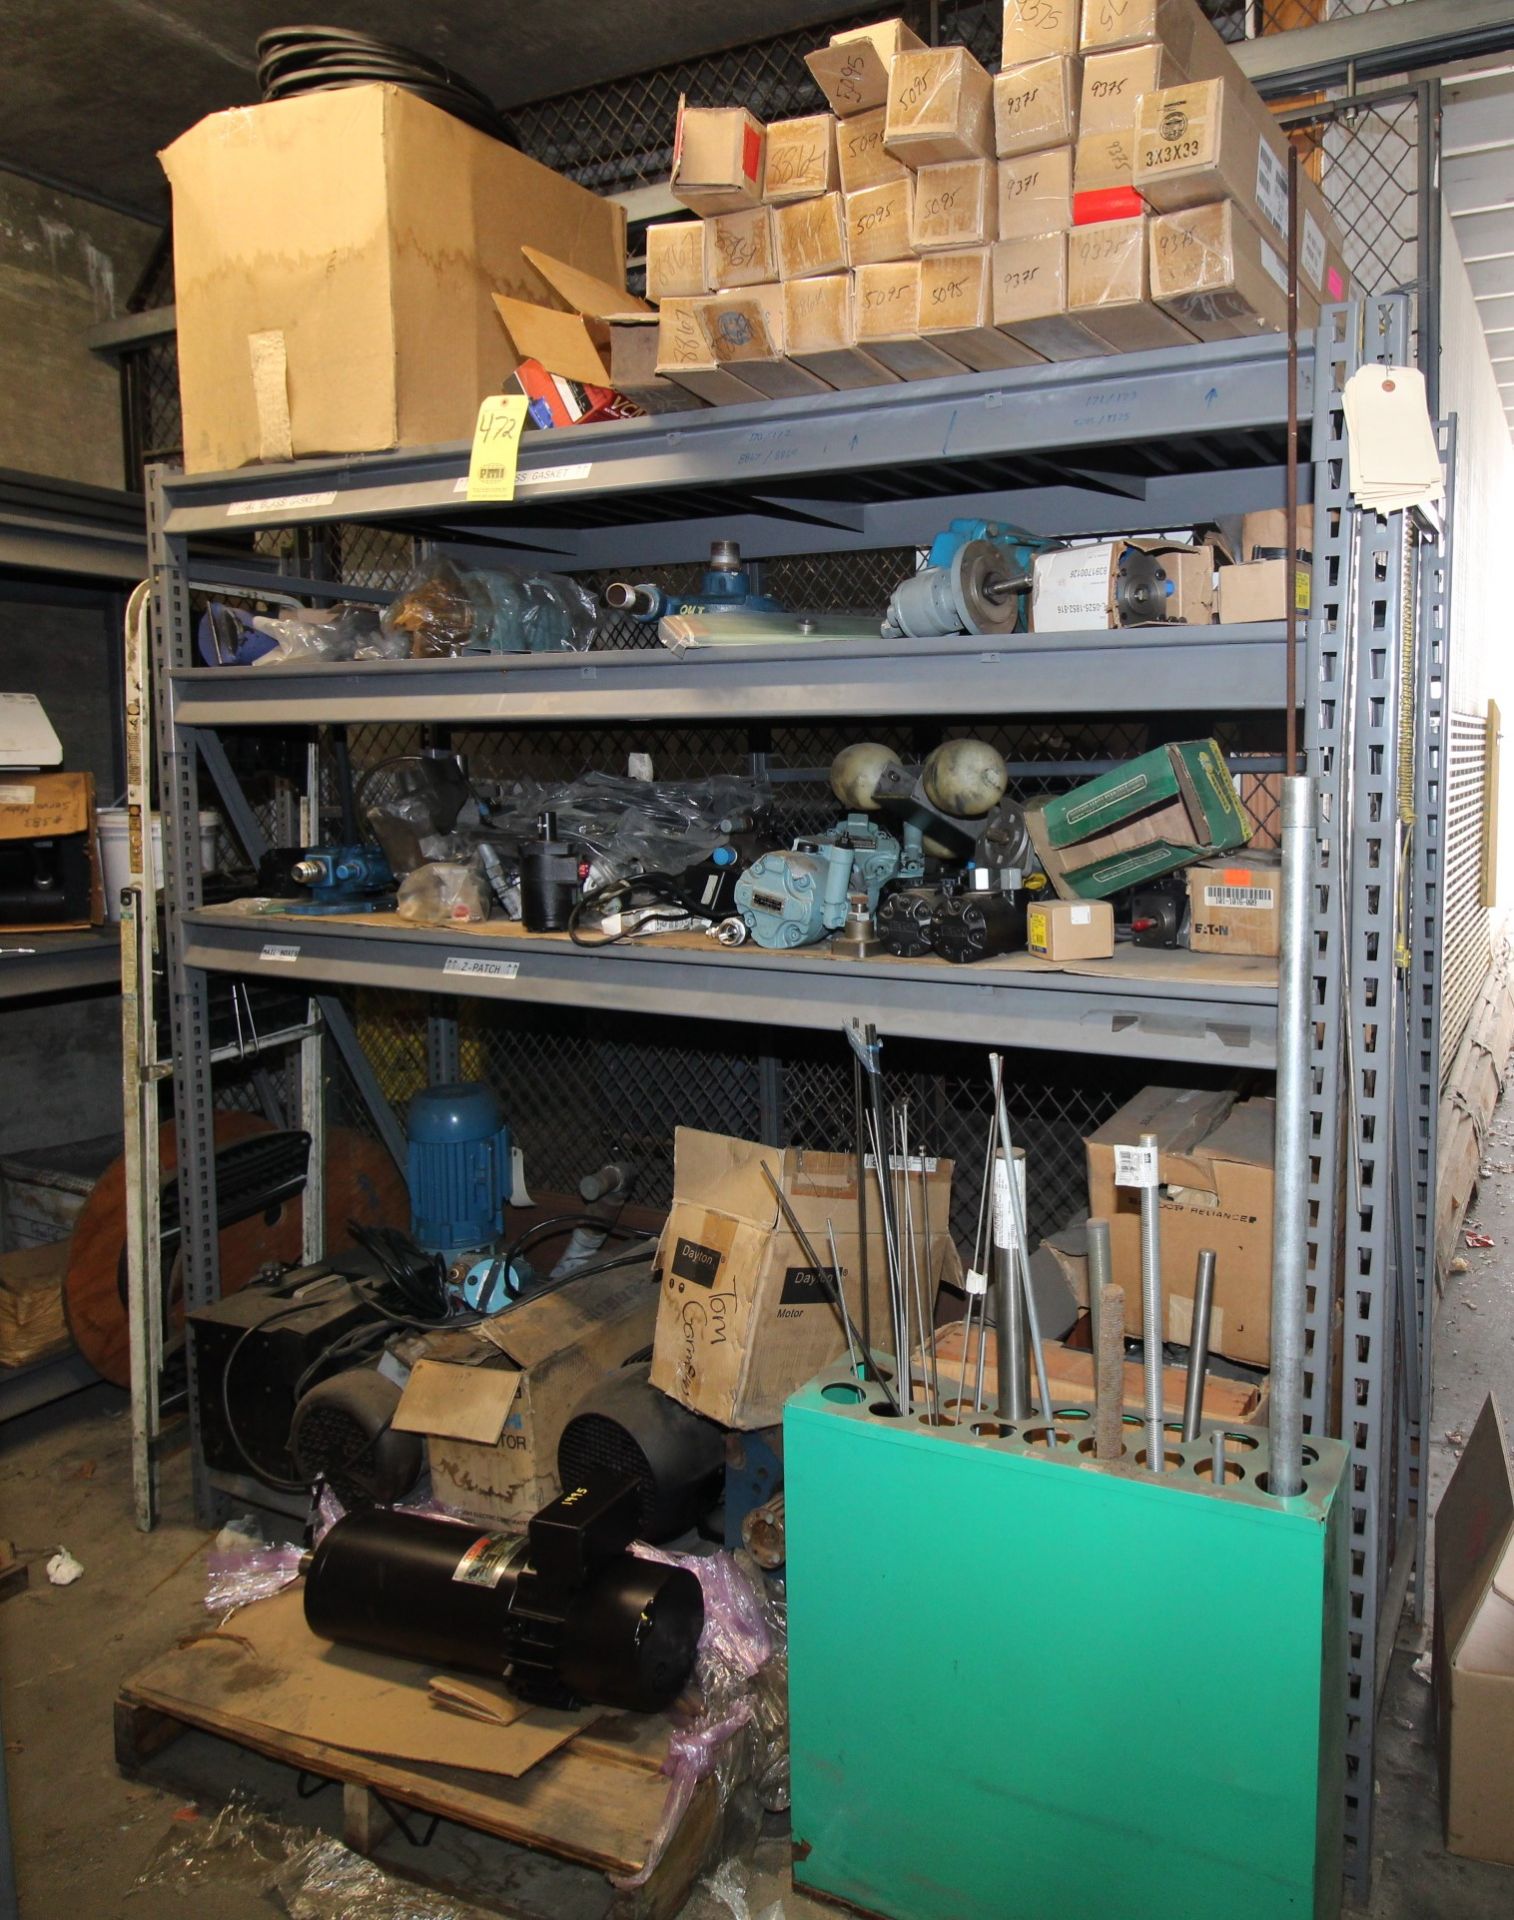 LOT CONSISTING OF: (4) shelves of electric motors, pumps, bladders & other items, w/ Lyons 24" x 72"